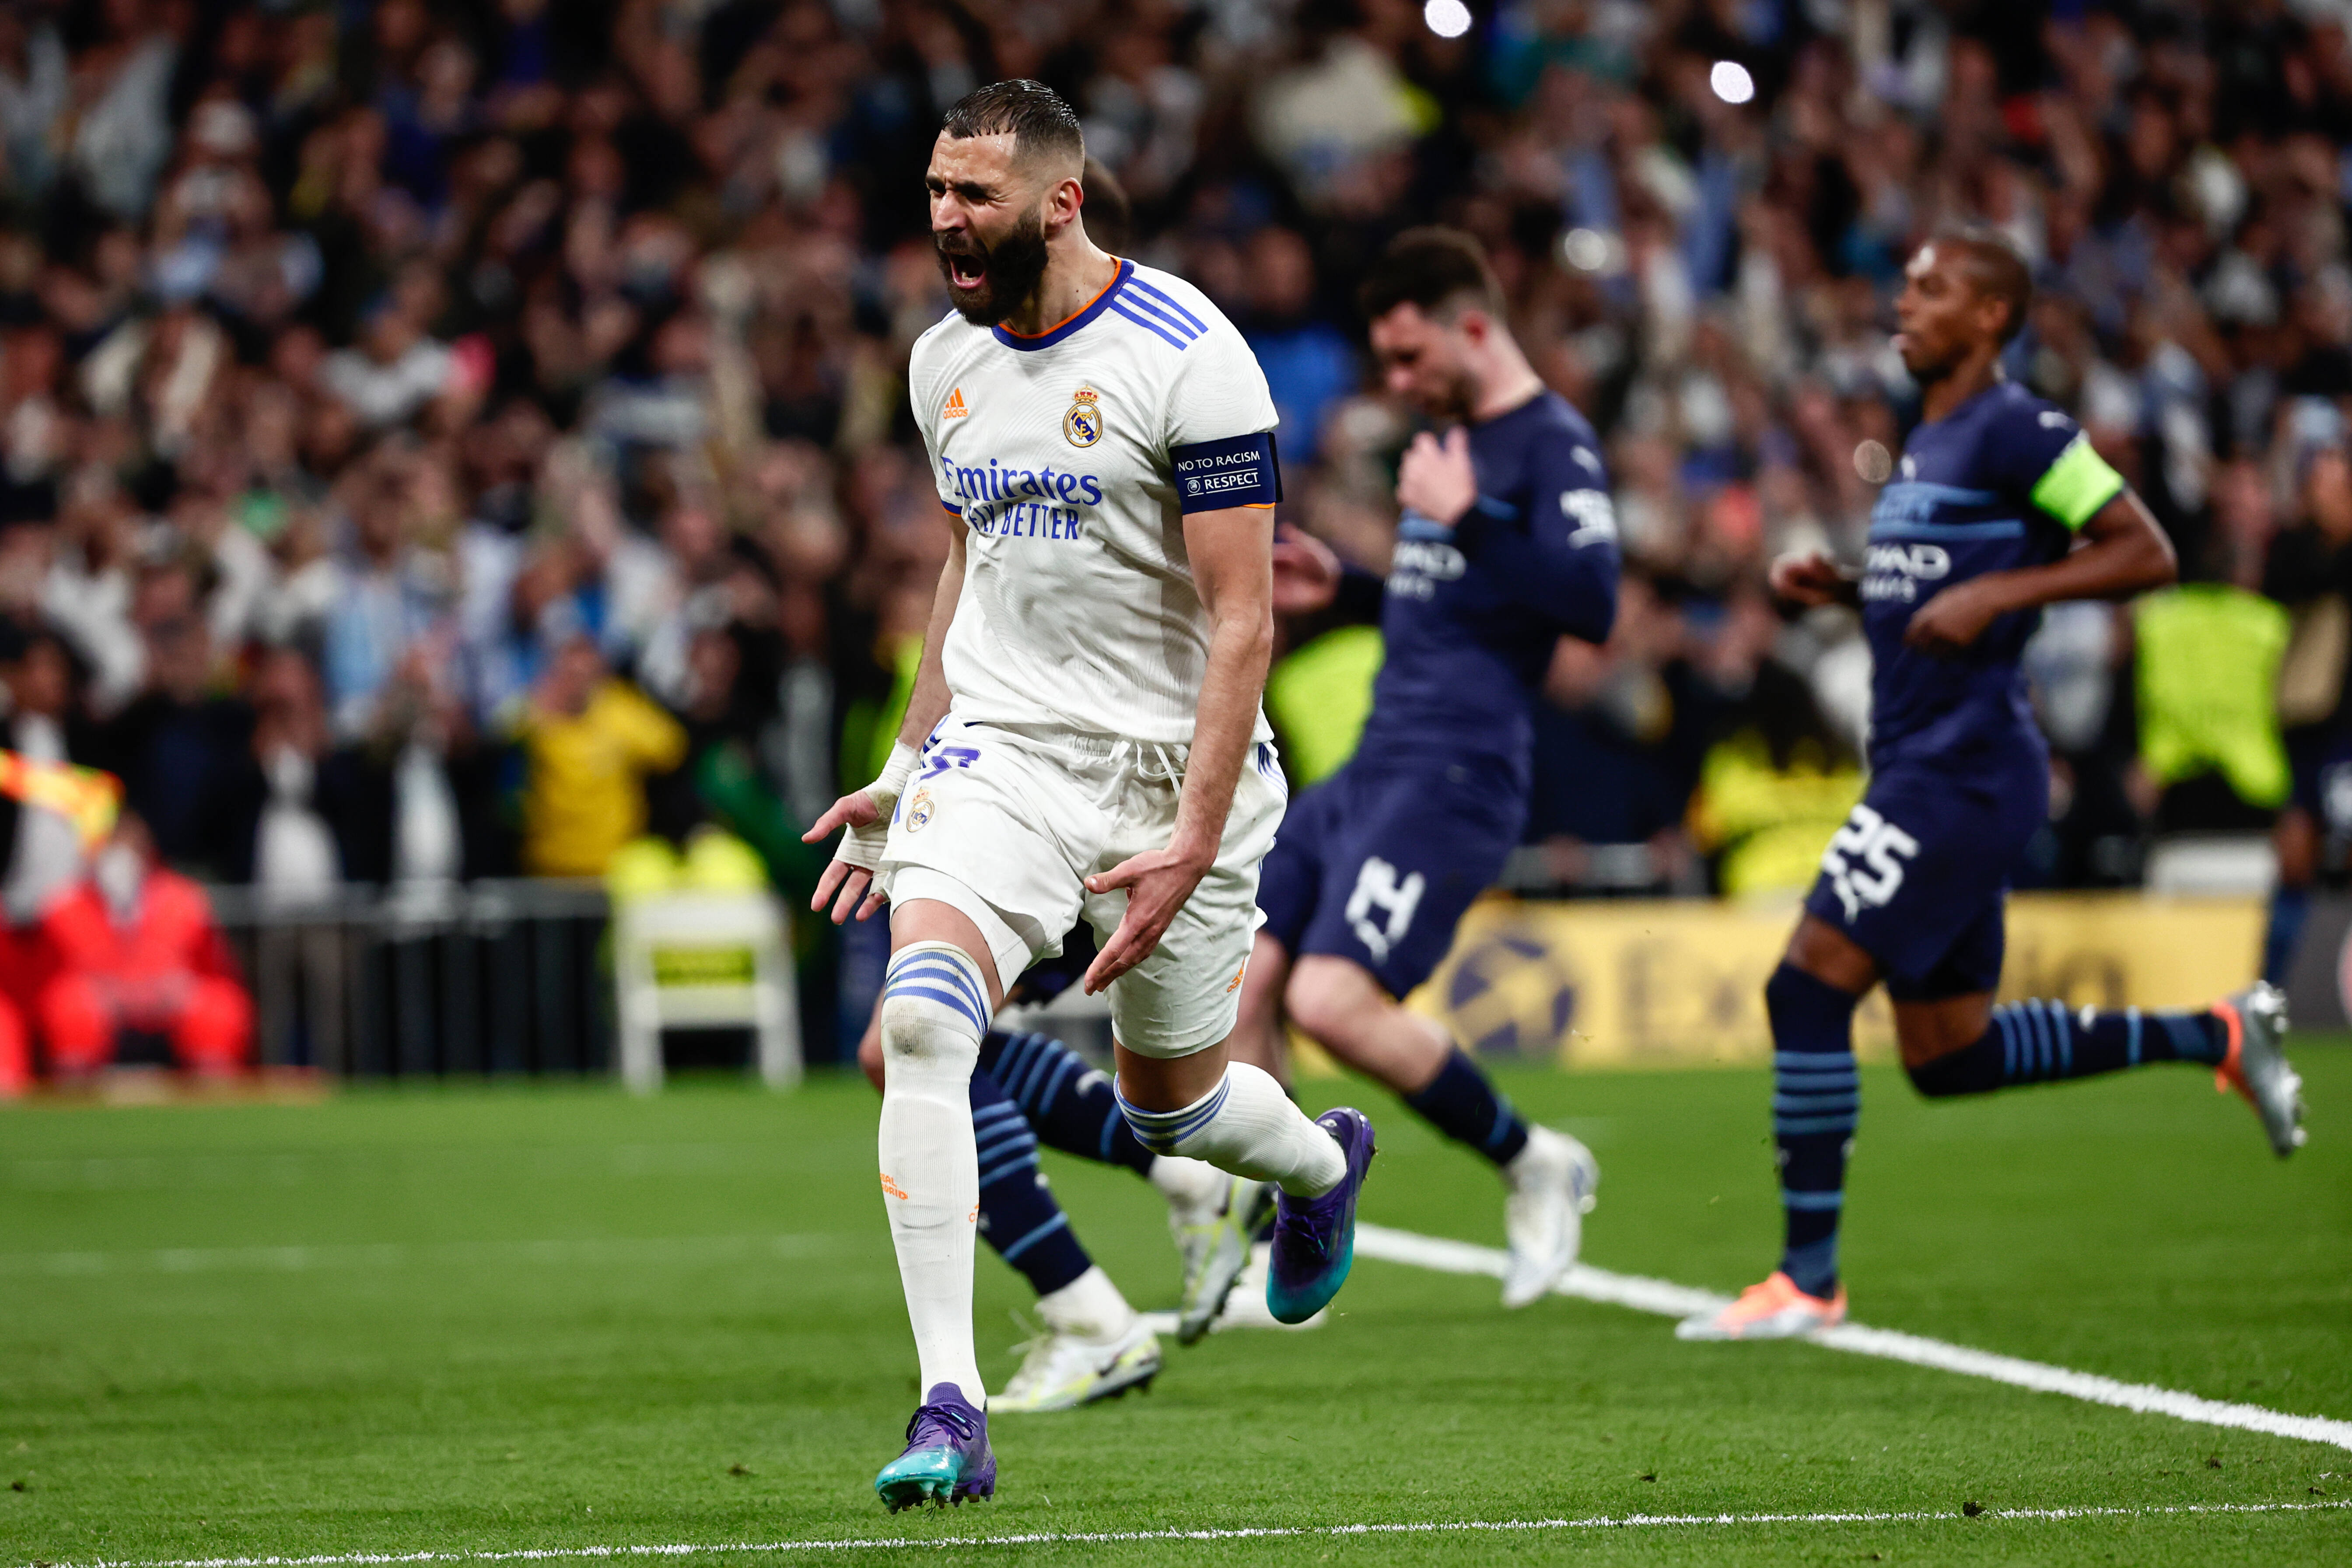 Karim Benzema pictured celebrating after scoring the winning goal in Real Madrid's 6-5 aggregate victory over Man City in their Champions League semi-final in 2022